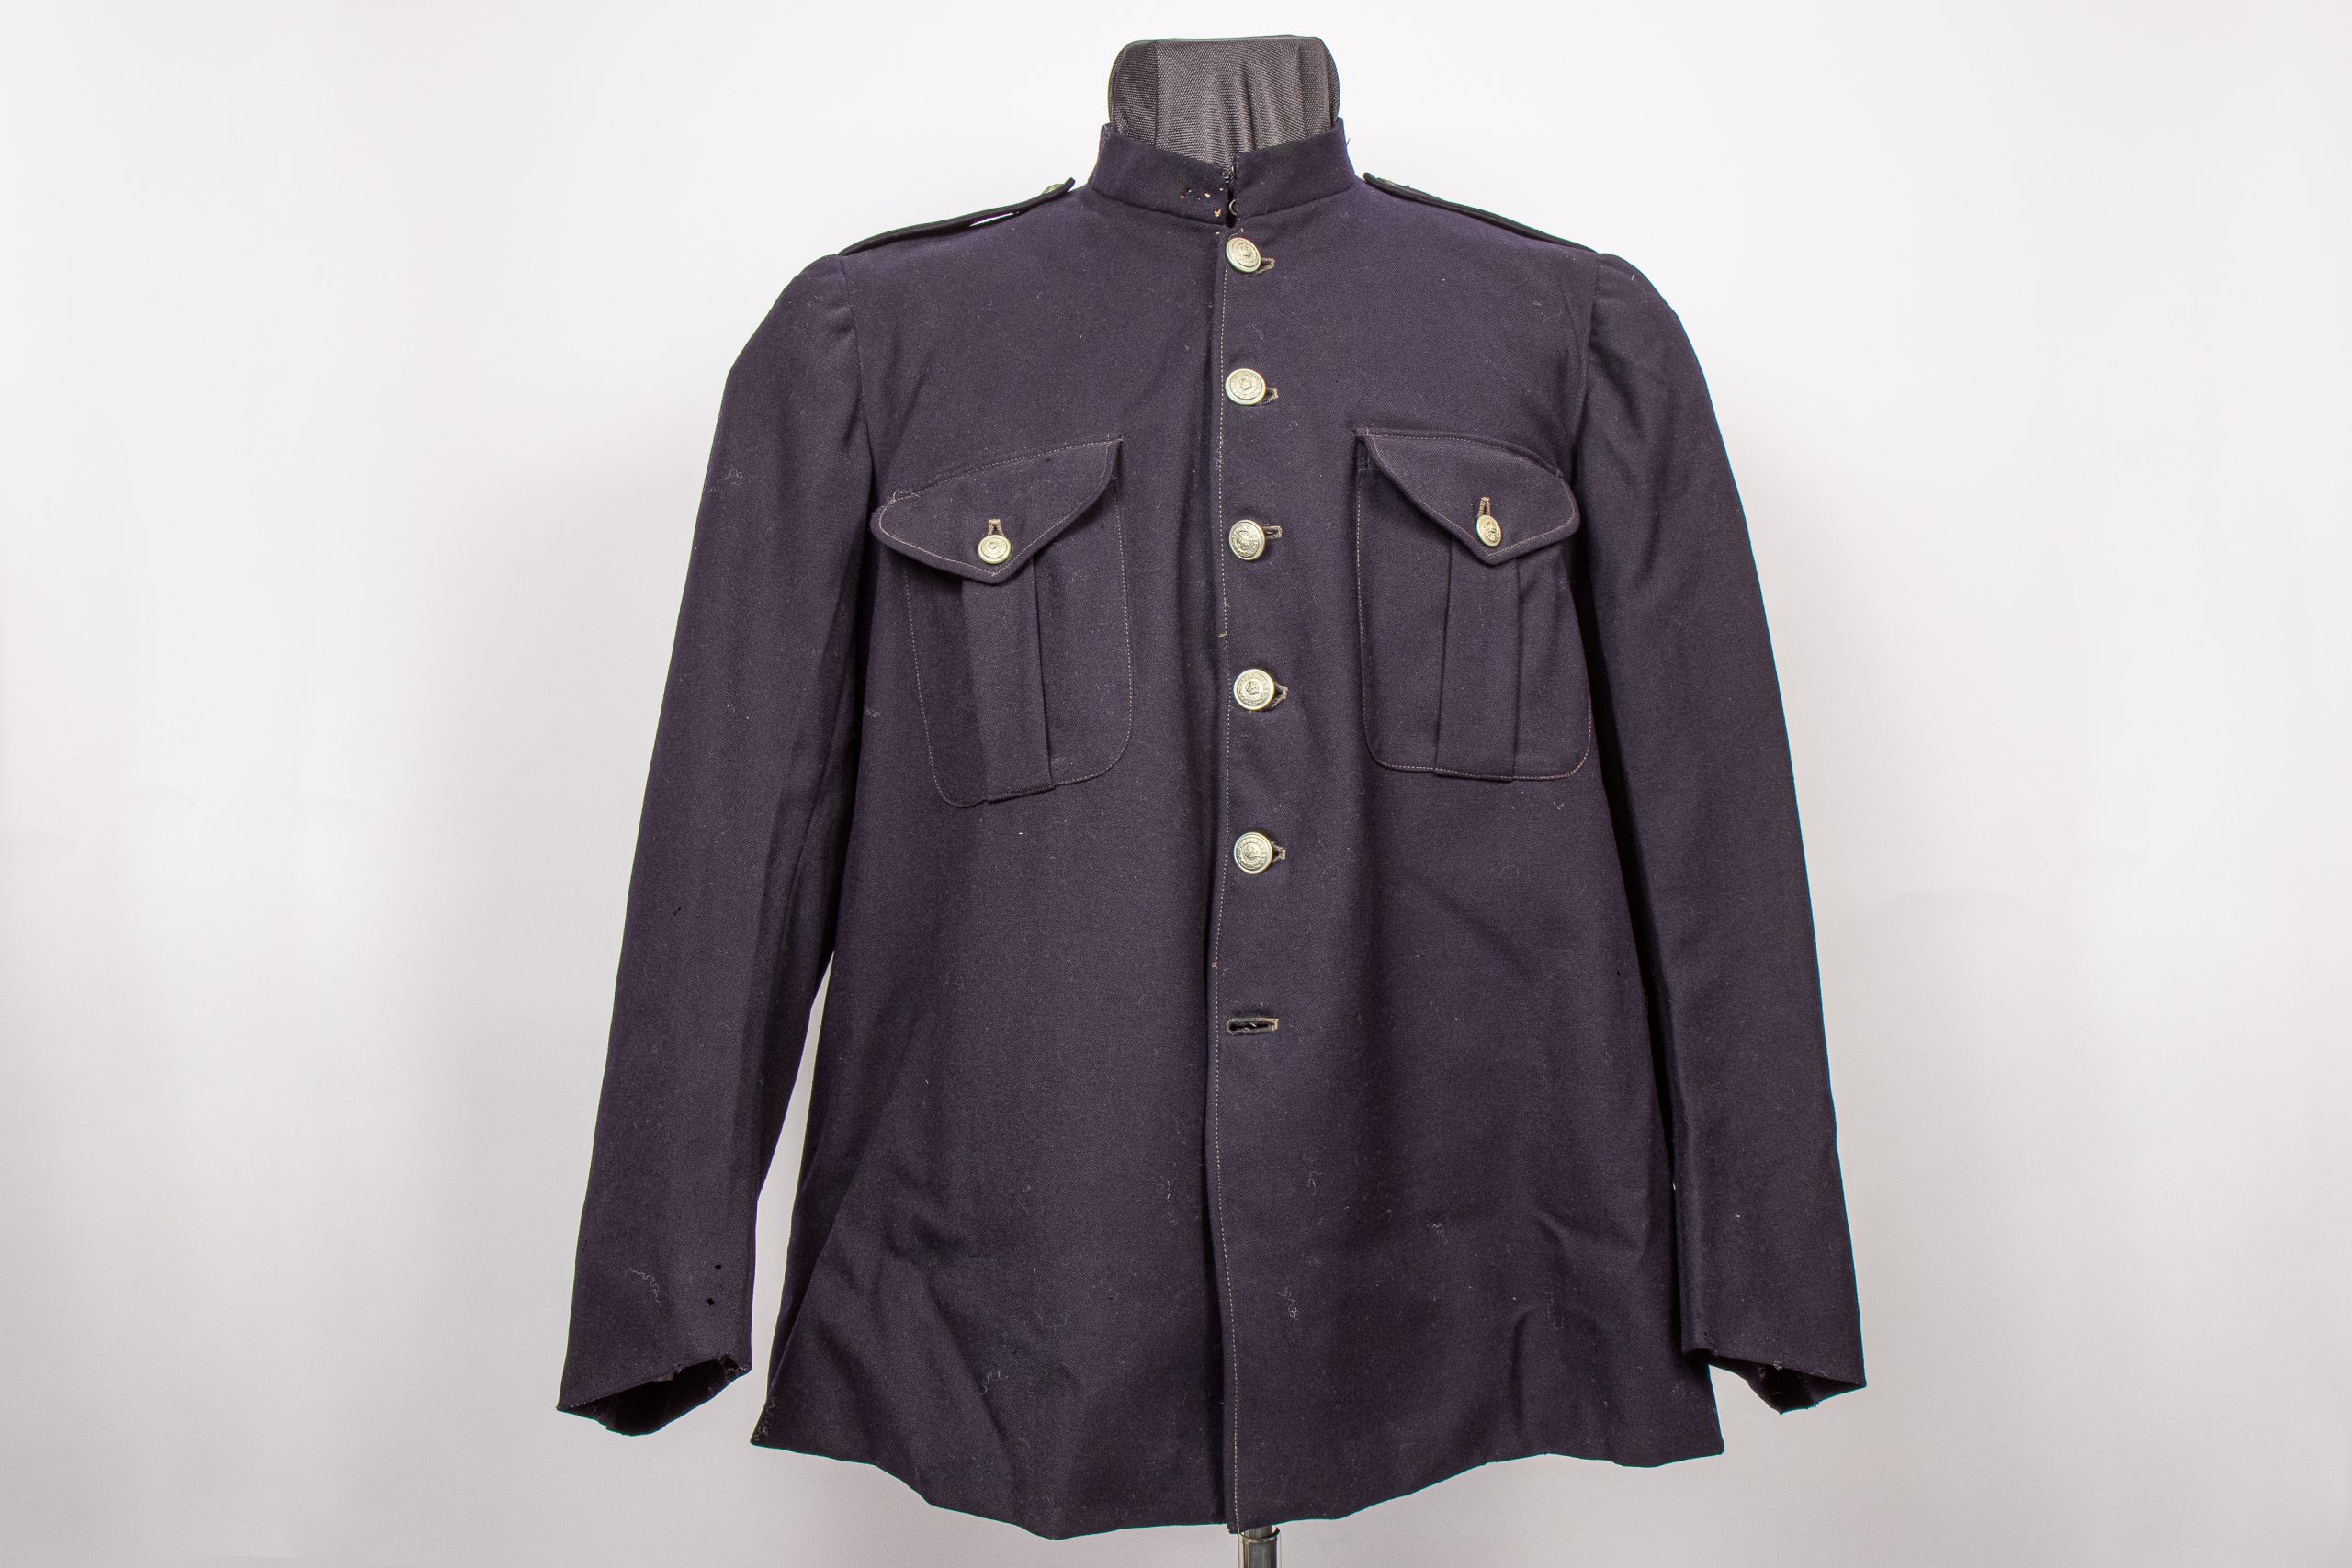 Old police jacket made of dark blue material adorned with five metal buttons and two front pockets, the collar is upturned.